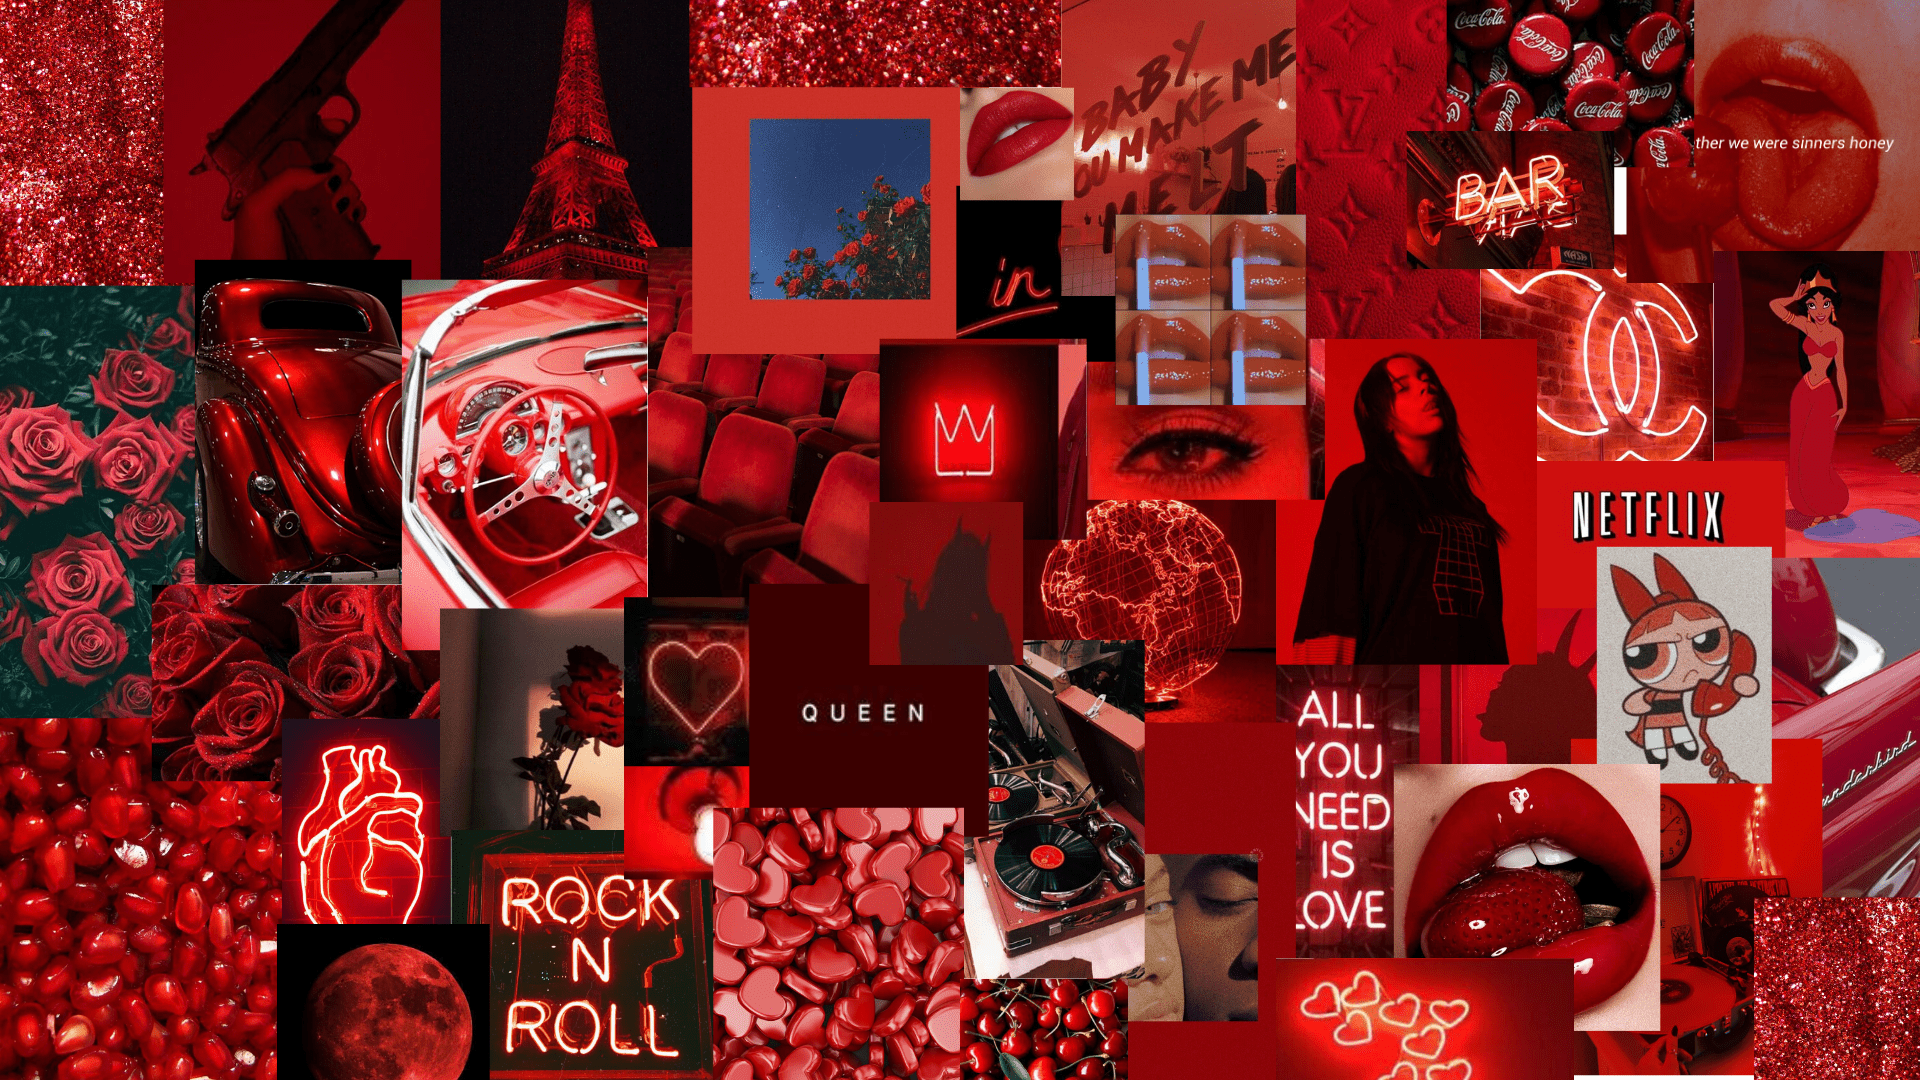 A red aesthetic wallpaper collage with red rose - Netflix, rock